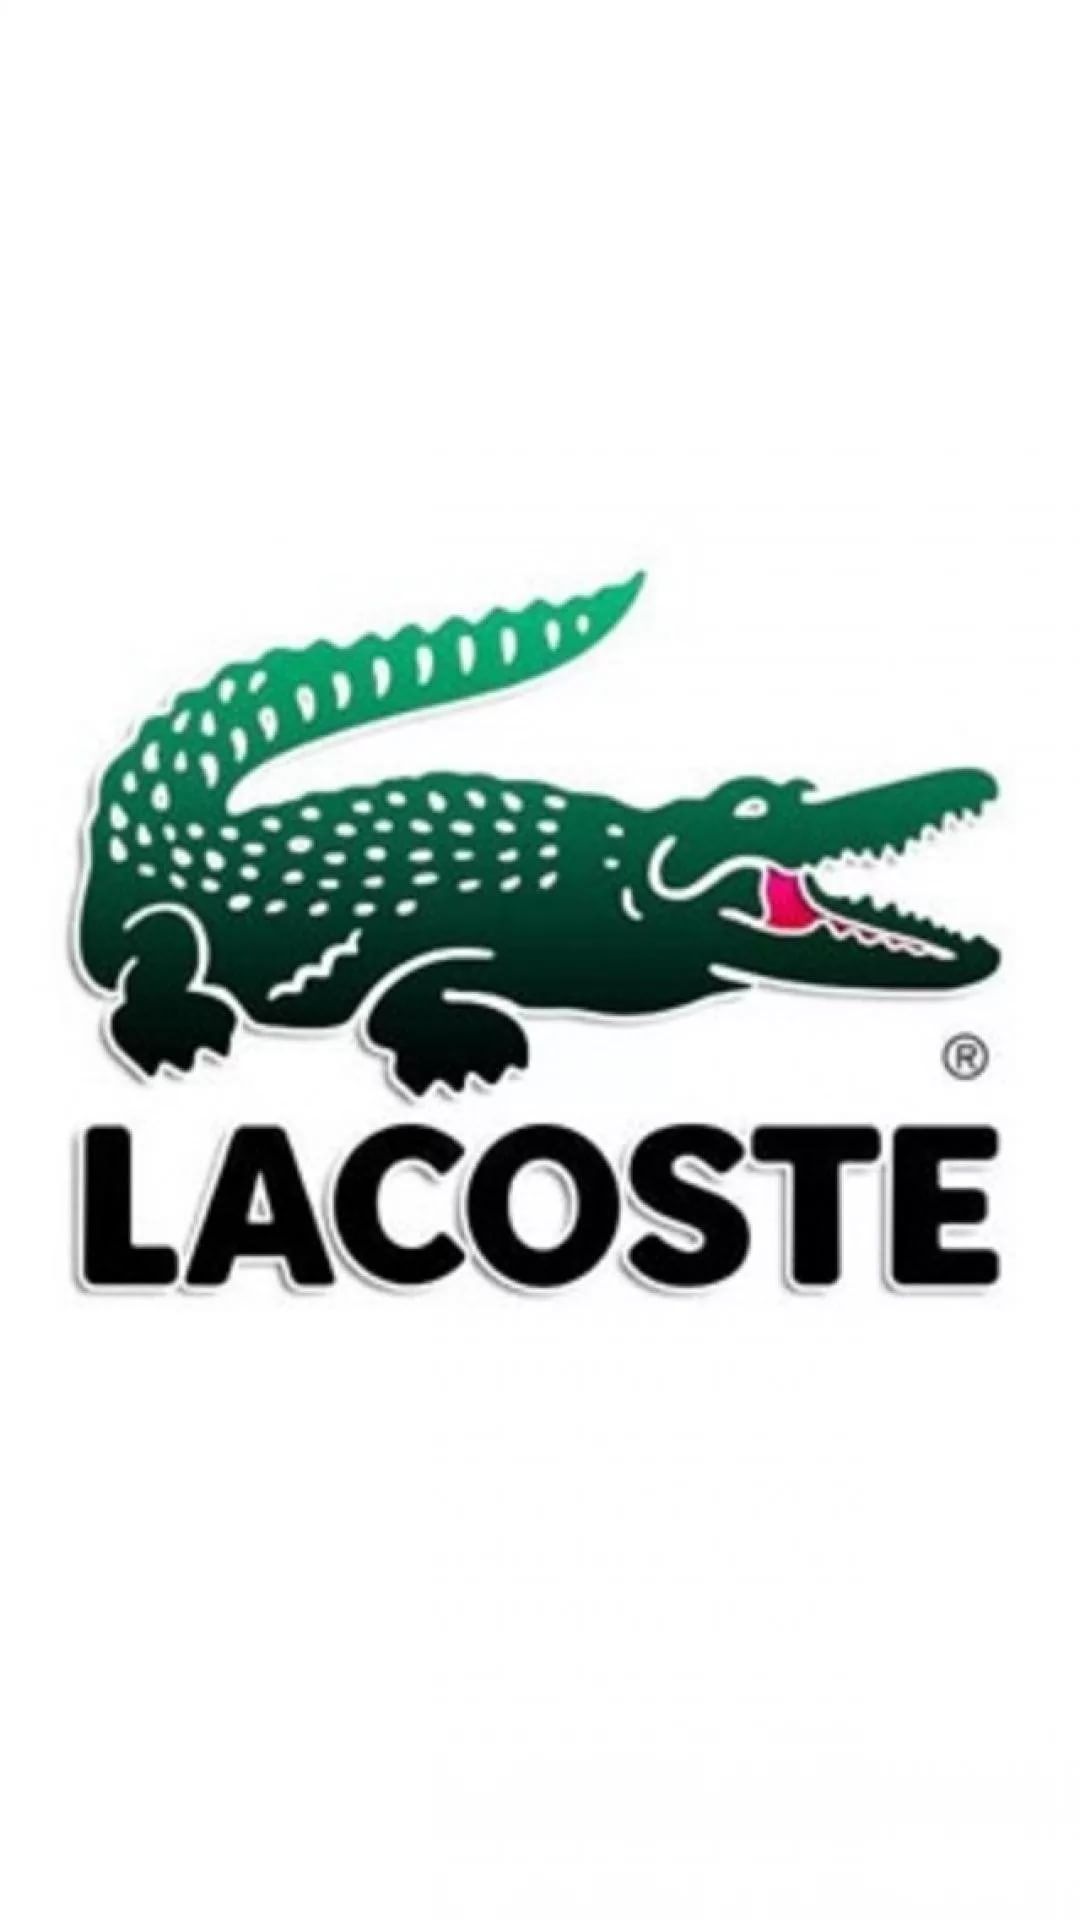 Lacoste phone background